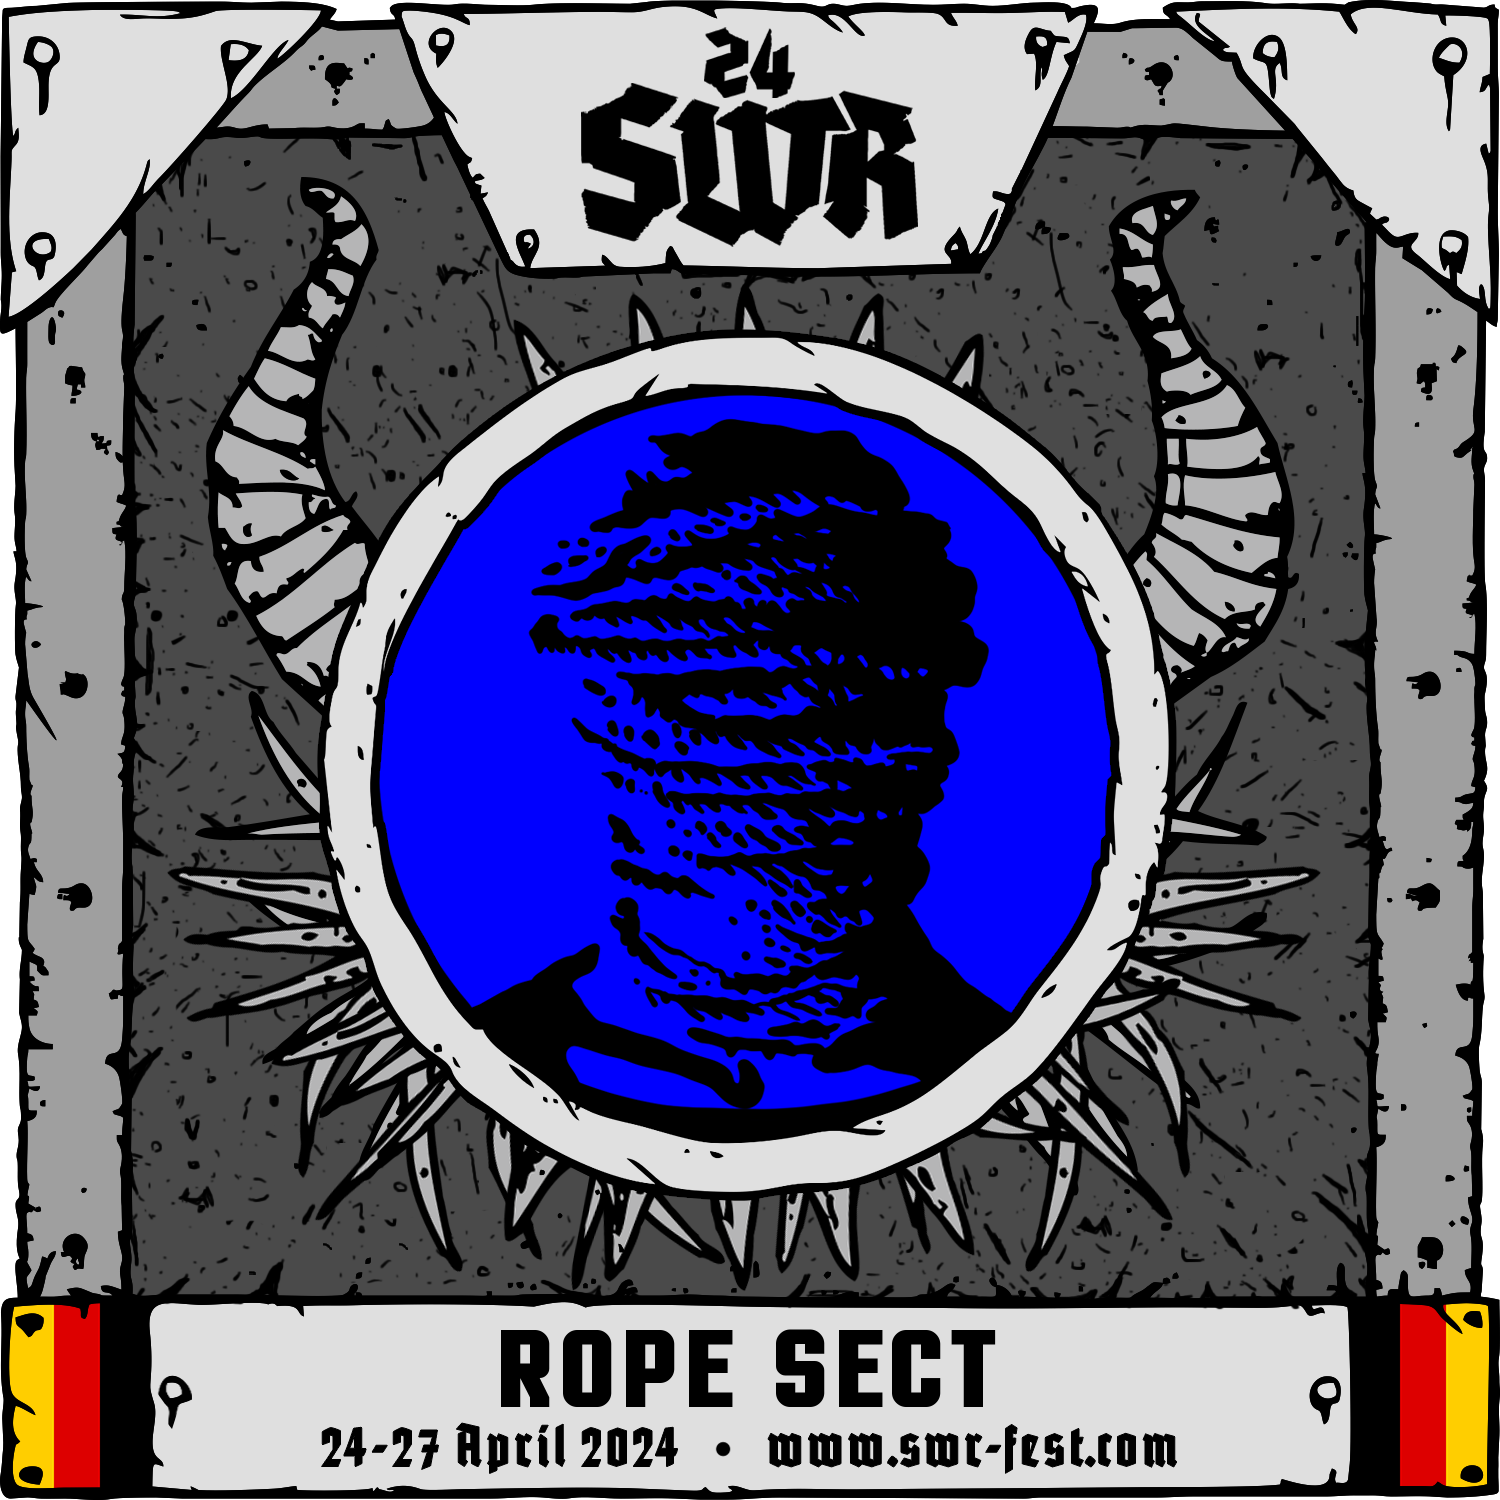 ROPE SECT